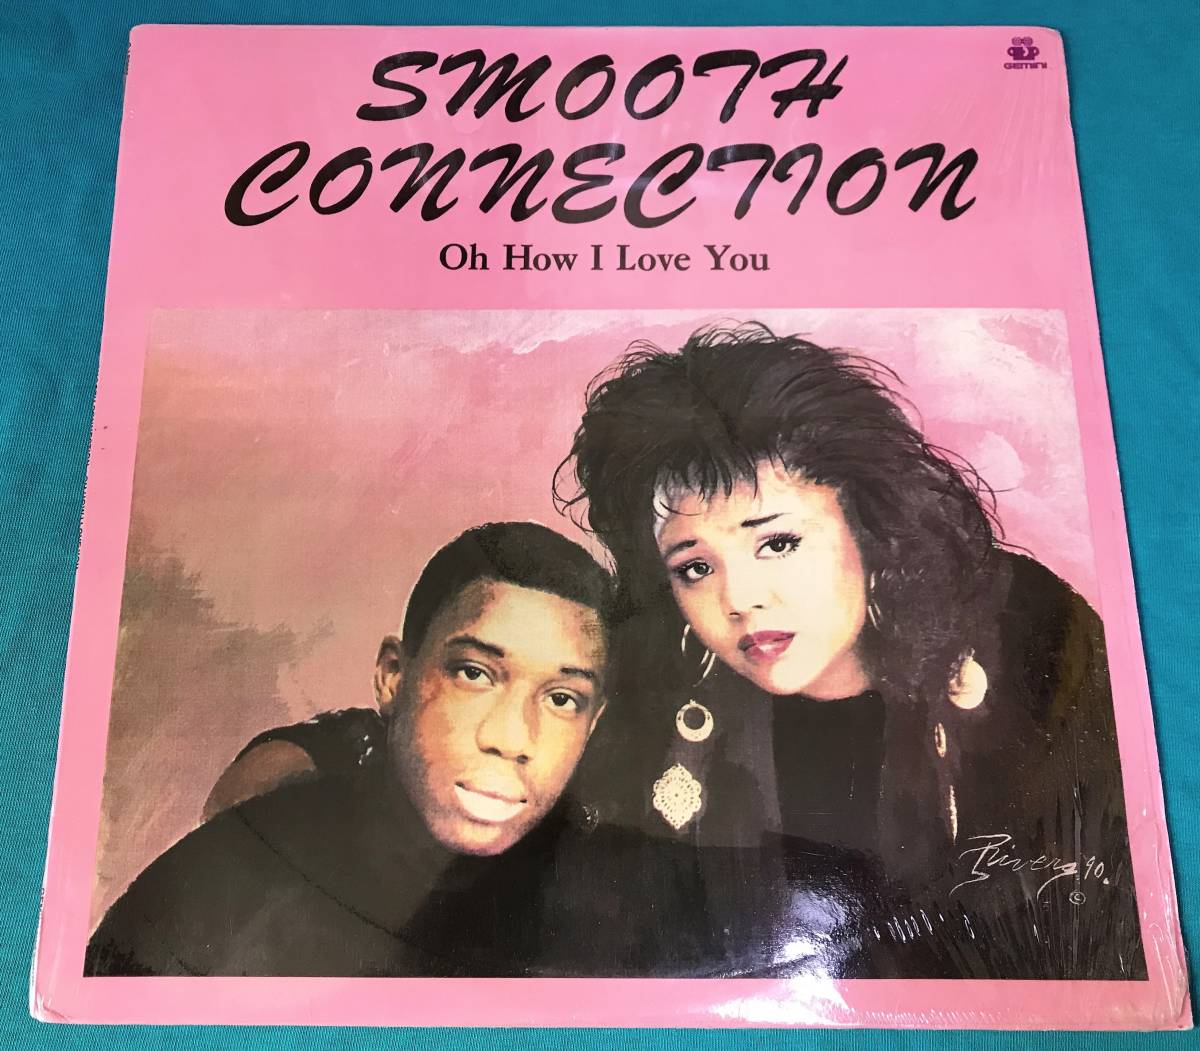 12”●Smooth Connection / Oh How I Love You USオリジナル盤G-LP3000 　AKO Mack 在籍 シュリンク残_画像1